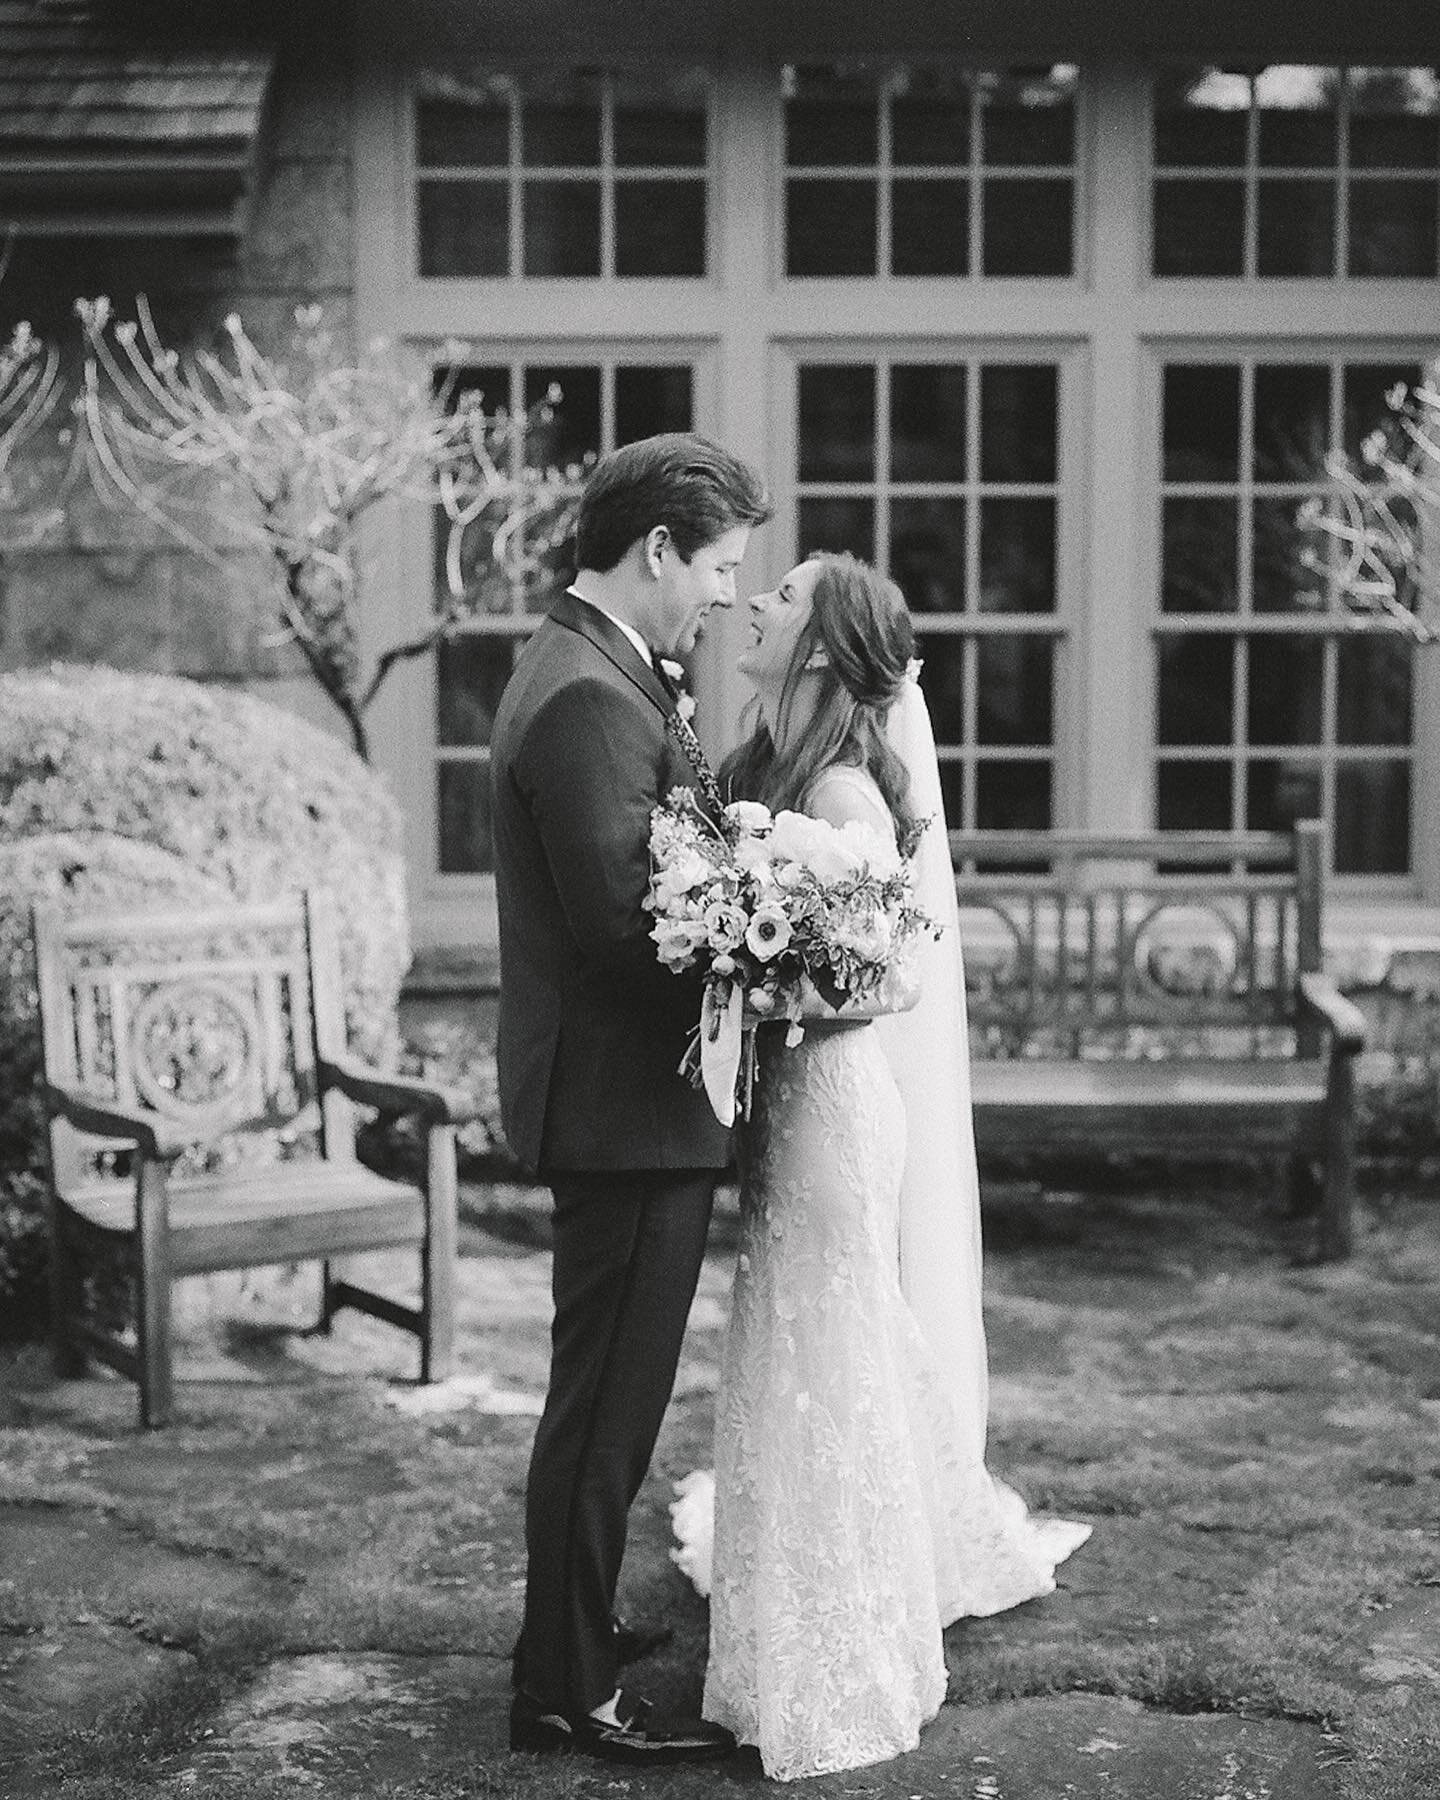 A few of my favorite photos of Mr. &amp; Mrs. Stone in the gorgeous courtyard at Highlands Country Club!